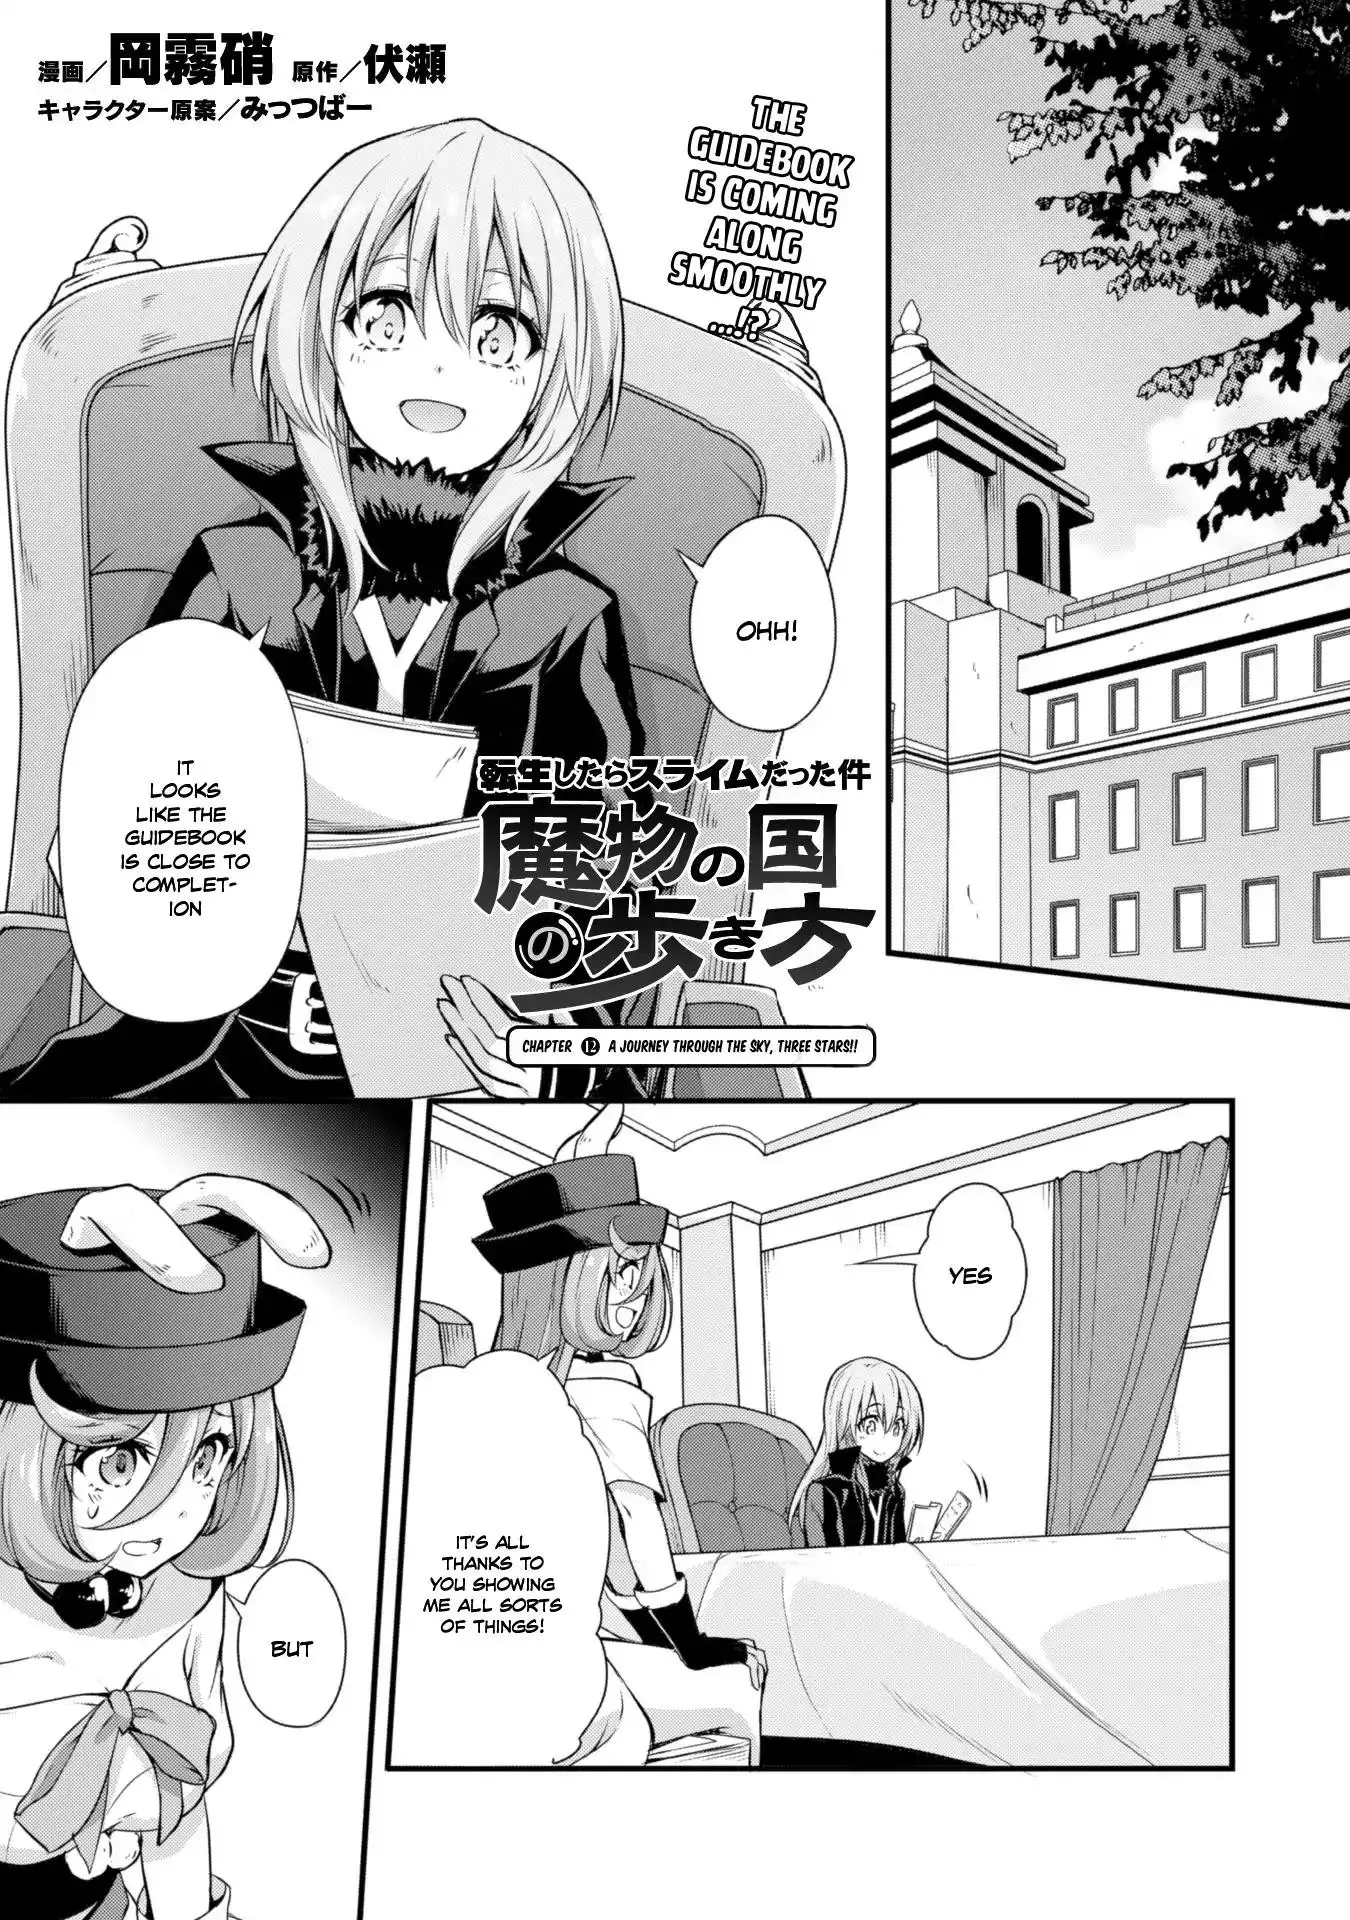 Tensei Shitara Slime Datta Ken: The Ways of Strolling in the Demon Country - 12 page 2